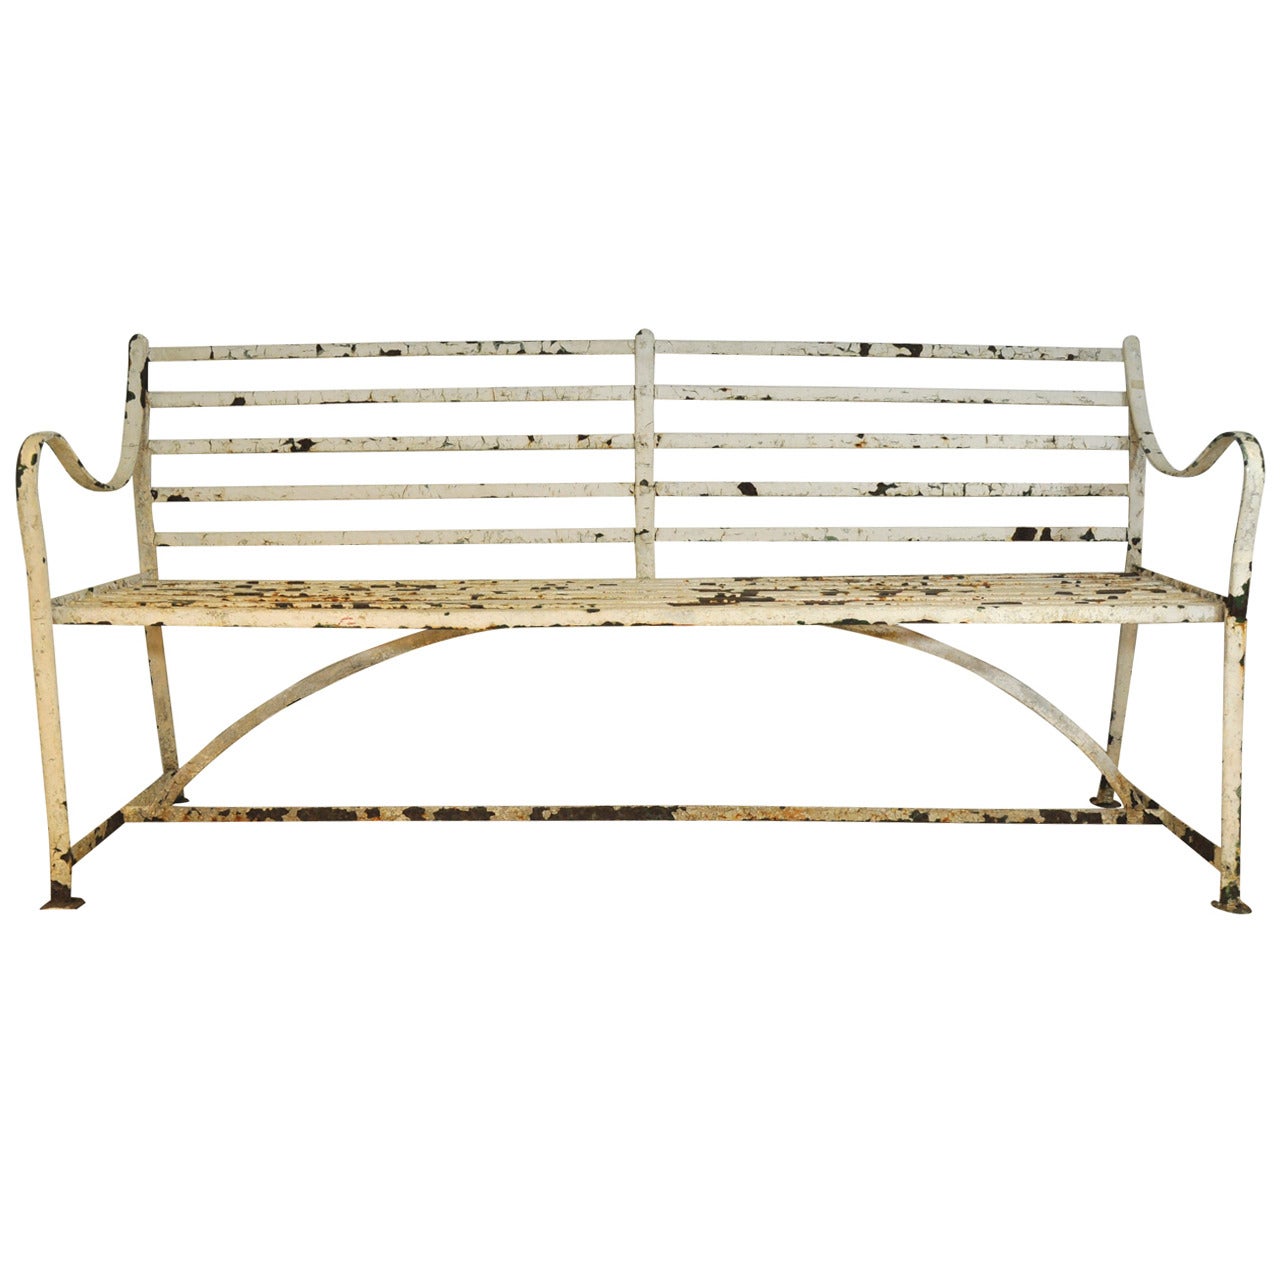 19th Century English Wrought Iron Strap Bench For Sale